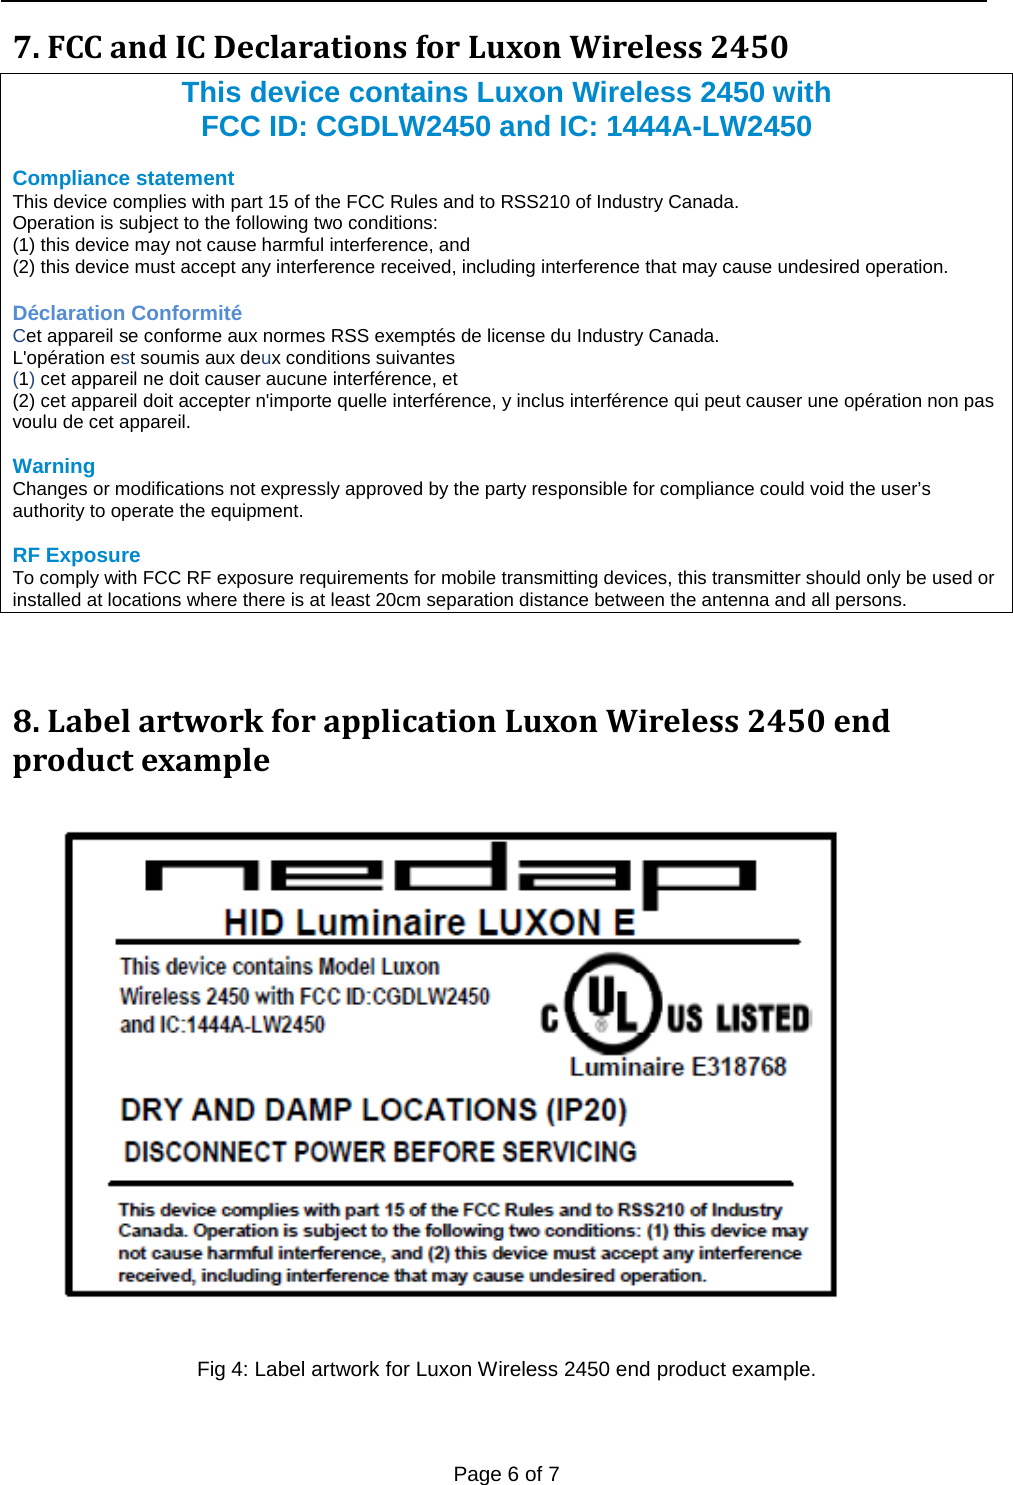   Page 6 of 7    7. FCC and IC Declarations for Luxon Wireless 2450   This device contains Luxon Wireless 2450 with FCC ID: CGDLW2450 and IC: 1444A-LW2450  Compliance statement  This device complies with part 15 of the FCC Rules and to RSS210 of Industry Canada. Operation is subject to the following two conditions: (1) this device may not cause harmful interference, and (2) this device must accept any interference received, including interference that may cause undesired operation.  Déclaration Conformité Cet appareil se conforme aux normes RSS exemptés de license du Industry Canada.  L&apos;opération est soumis aux deux conditions suivantes  (1) cet appareil ne doit causer aucune interférence, et  (2) cet appareil doit accepter n&apos;importe quelle interférence, y inclus interférence qui peut causer une opération non pas voulu de cet appareil.  Warning  Changes or modifications not expressly approved by the party responsible for compliance could void the user’s authority to operate the equipment.  RF Exposure To comply with FCC RF exposure requirements for mobile transmitting devices, this transmitter should only be used or installed at locations where there is at least 20cm separation distance between the antenna and all persons.  8. Label artwork for application Luxon Wireless 2450 end product example   Fig 4: Label artwork for Luxon Wireless 2450 end product example.   